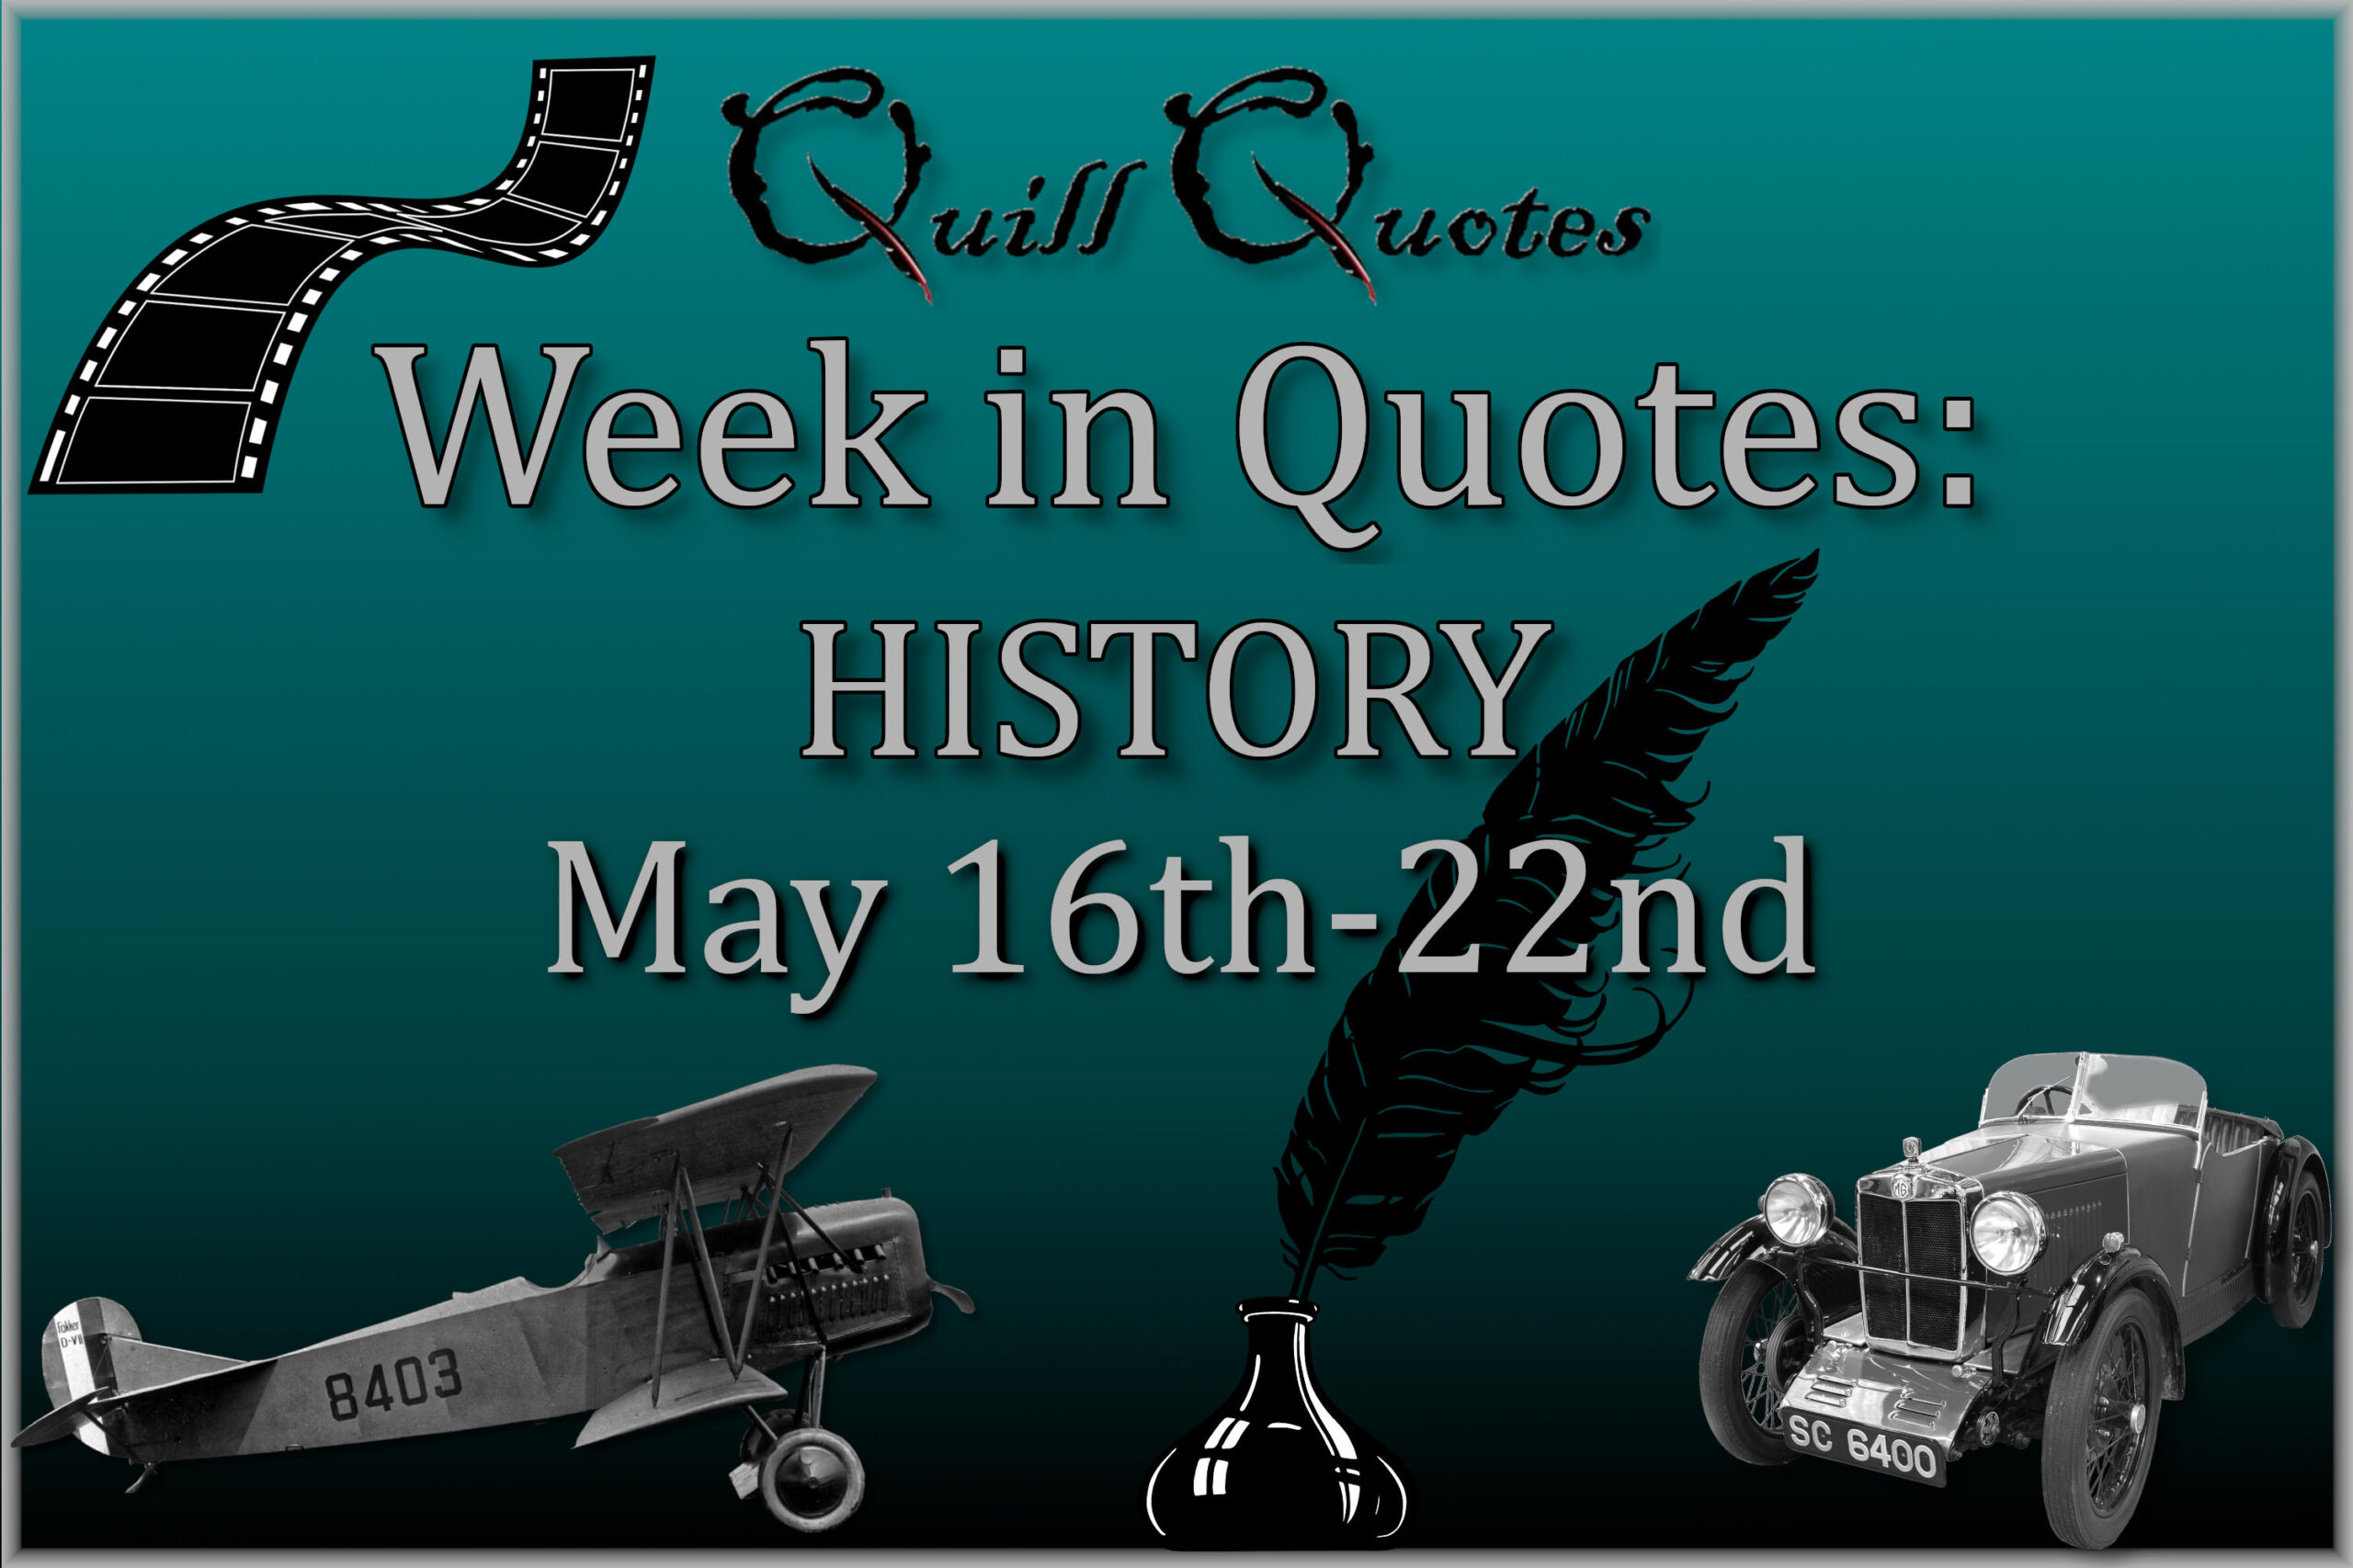 Week in Quotes: HISTORY May 16th-22nd